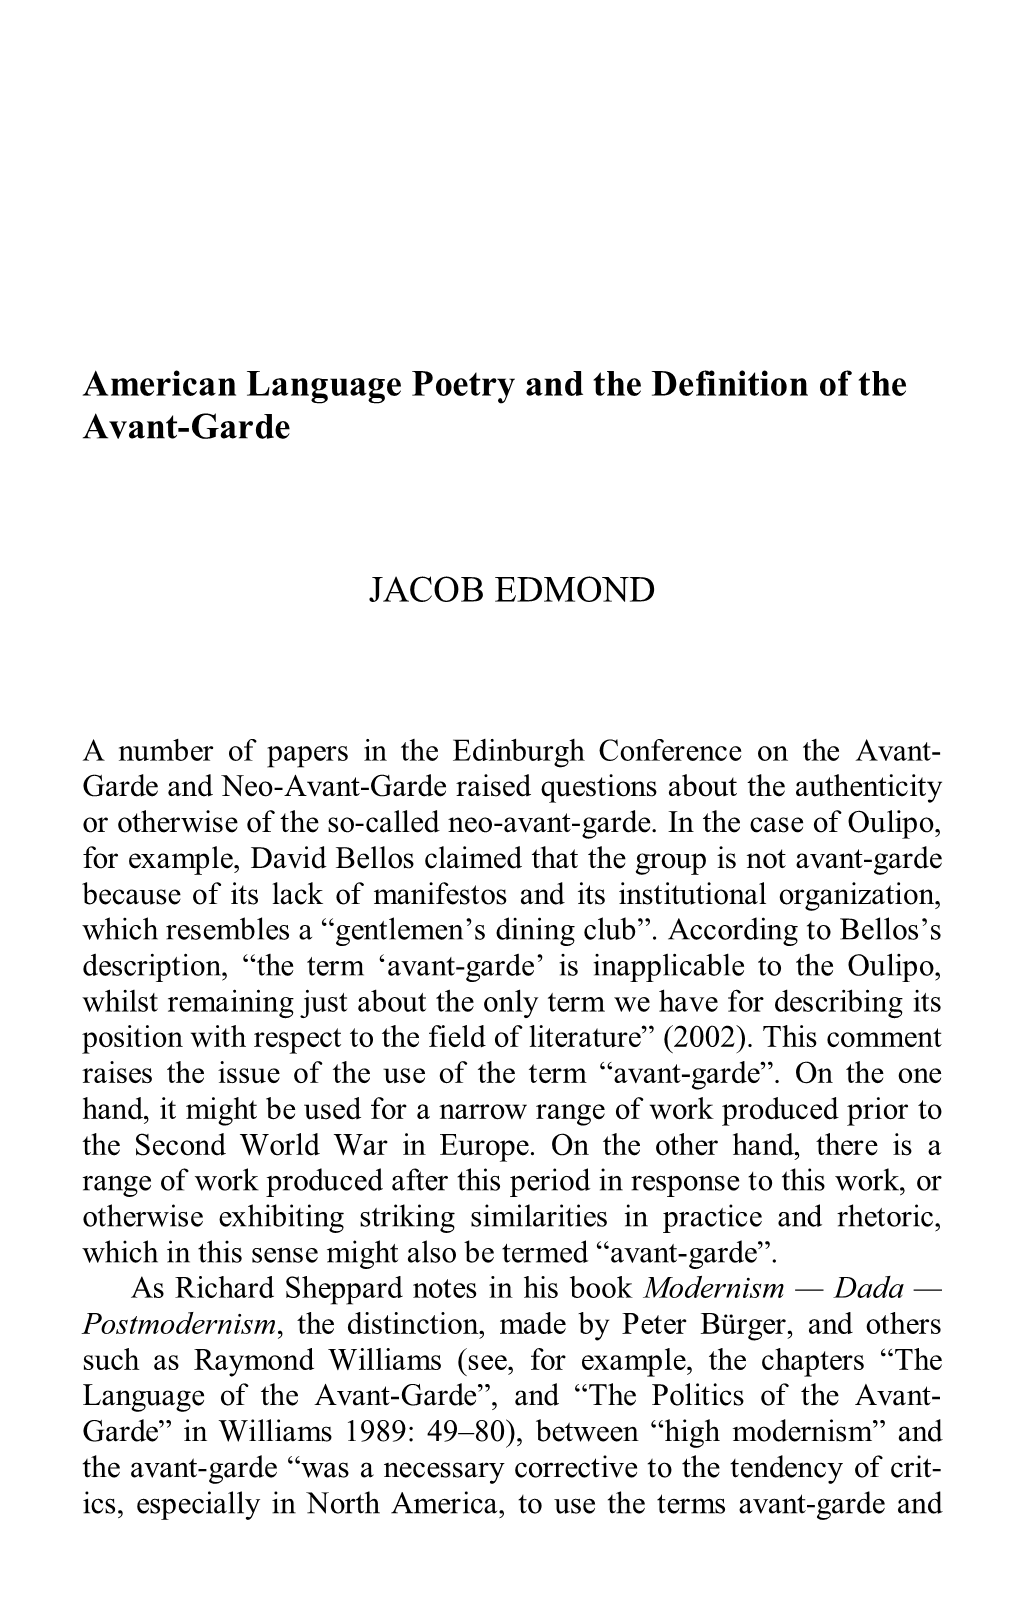 American Language Poetry and the Definition of the Avant-Garde